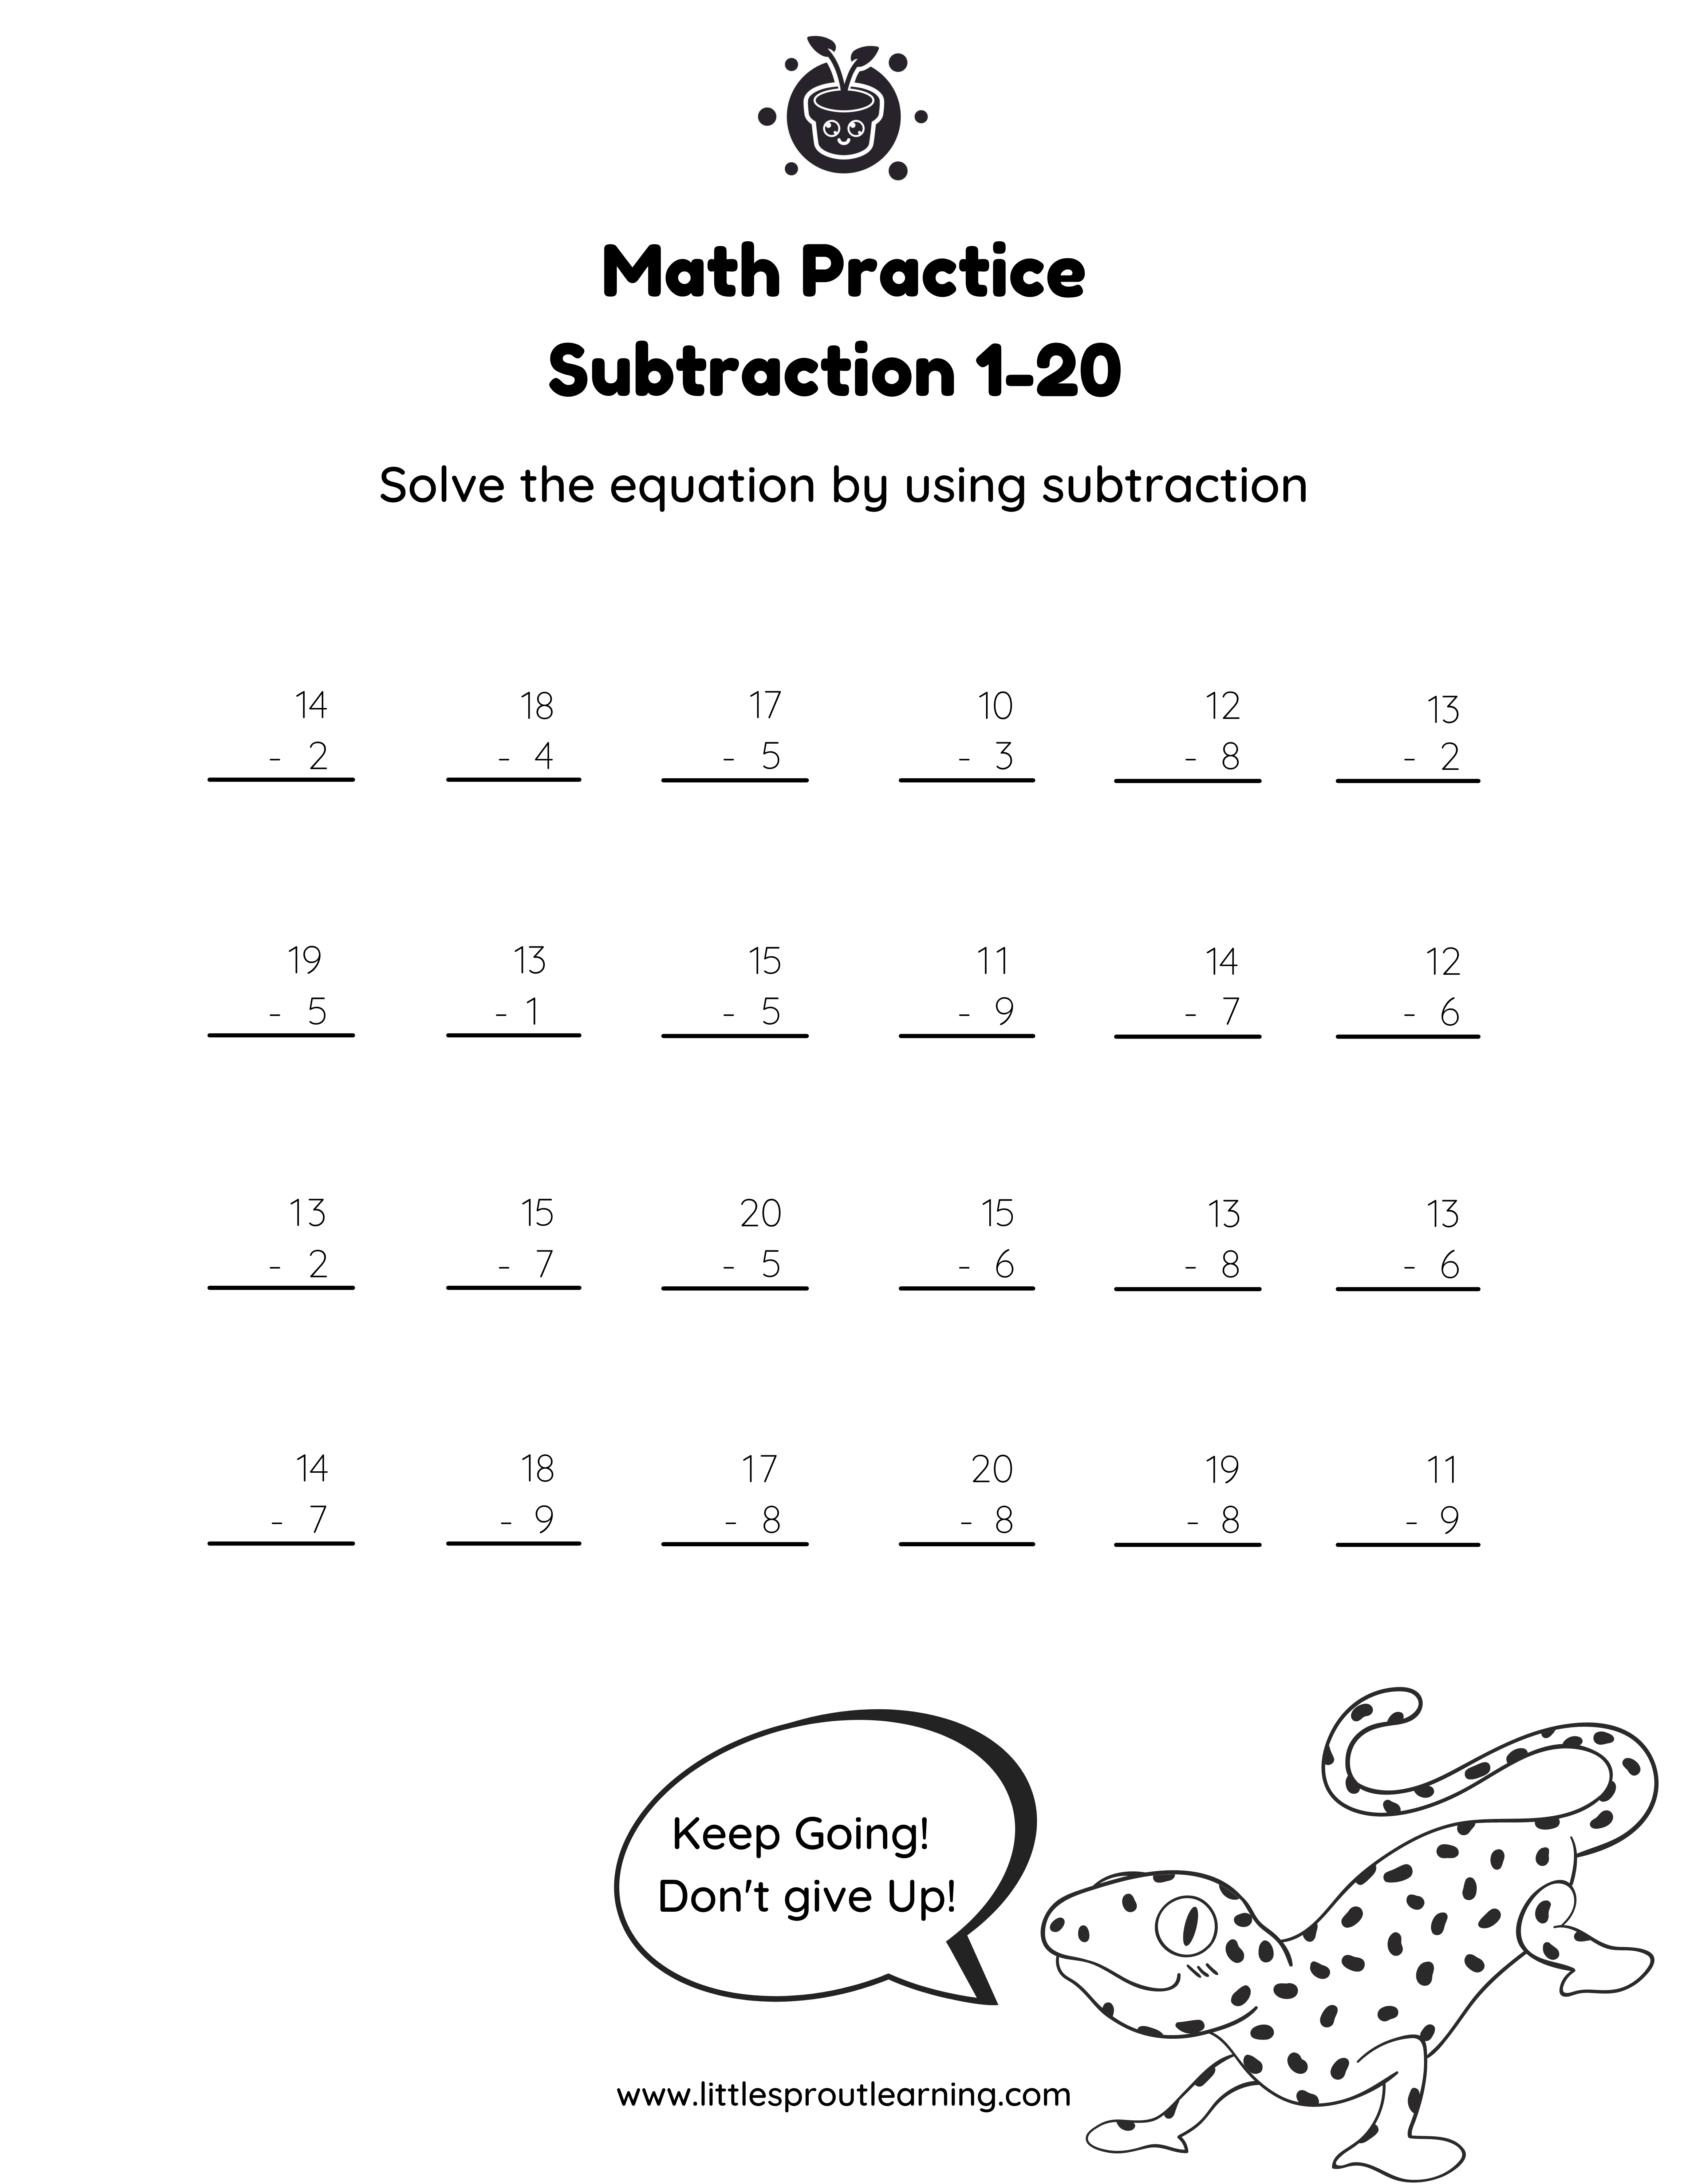 Stacked Subtraction – Subtracting Single Digits from 2 Digits